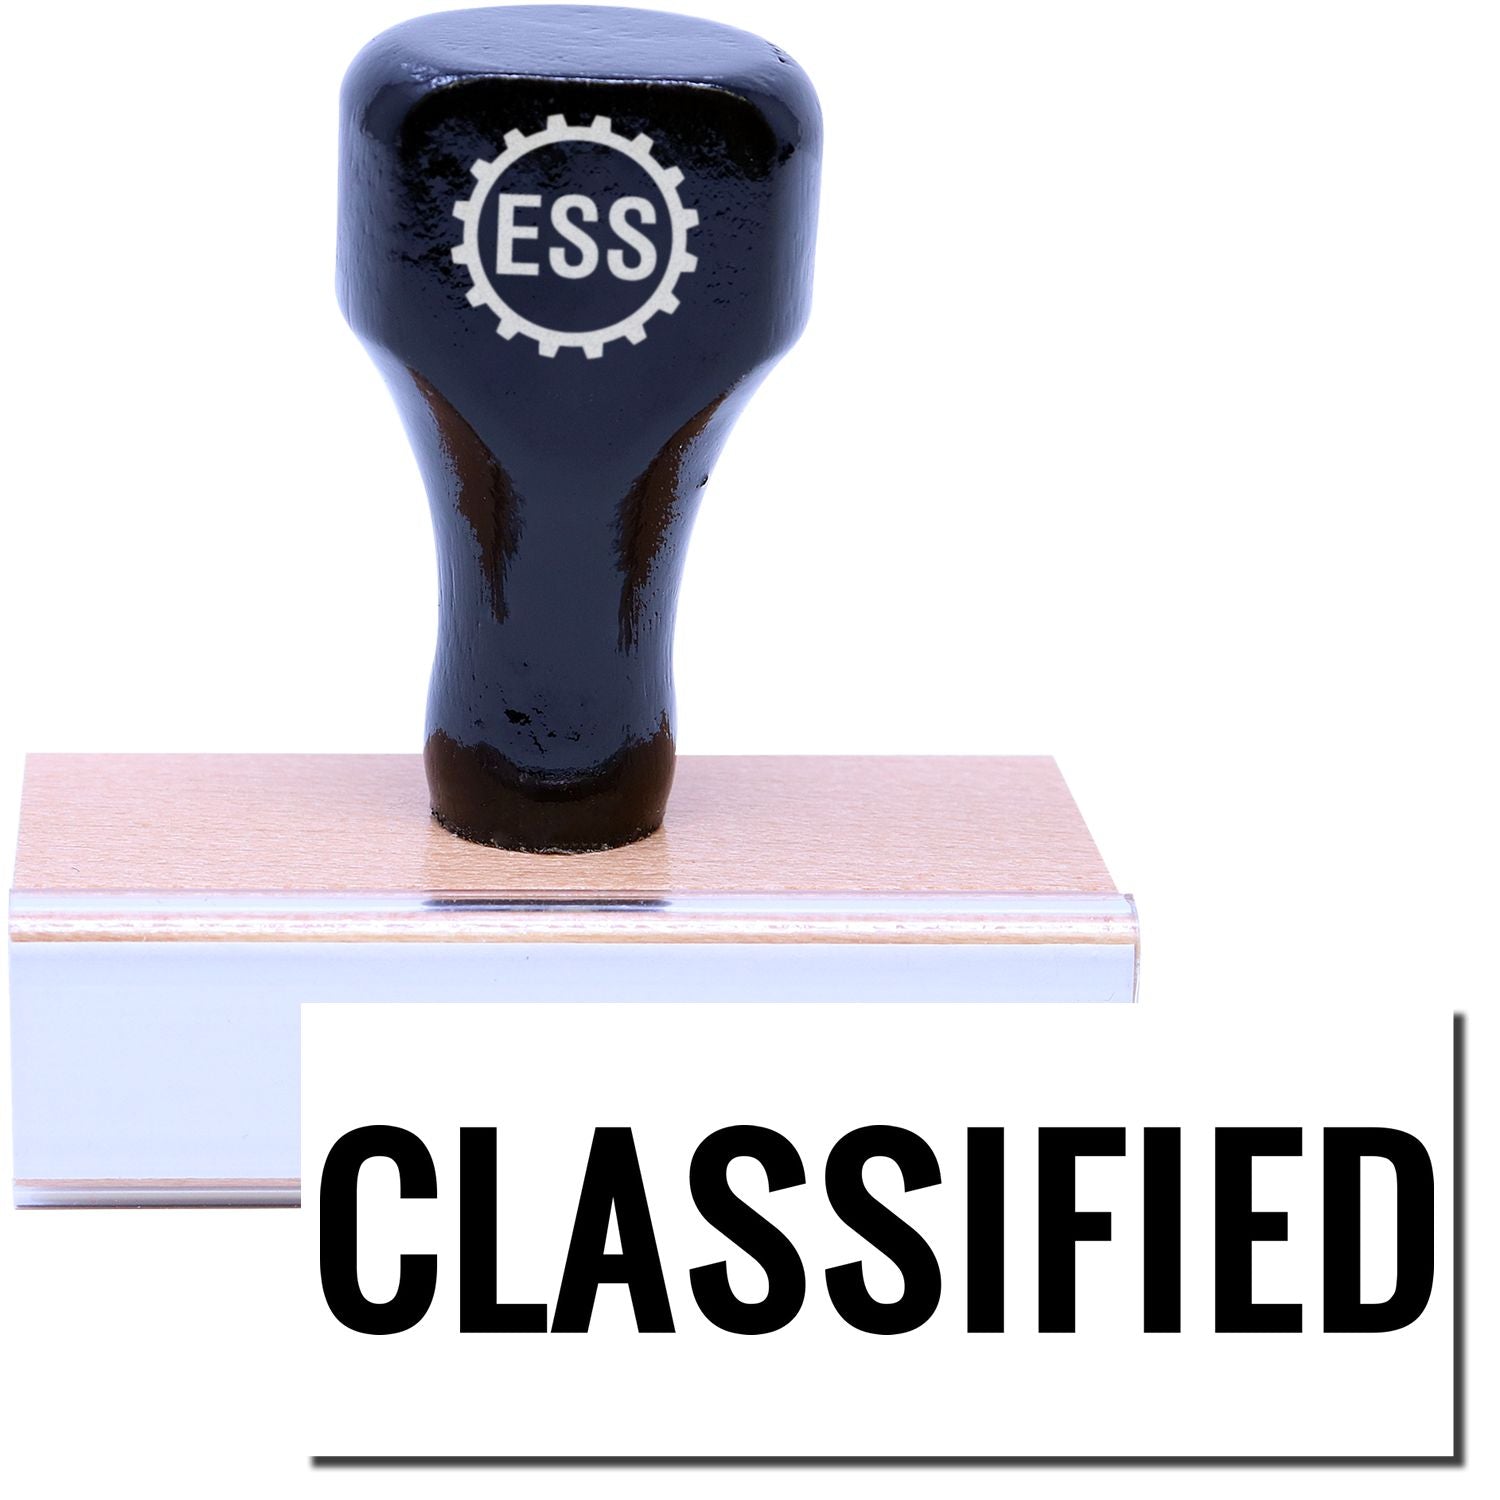 A stock office rubber stamp with a stamped image showing how the text "CLASSIFIED" is displayed after stamping.